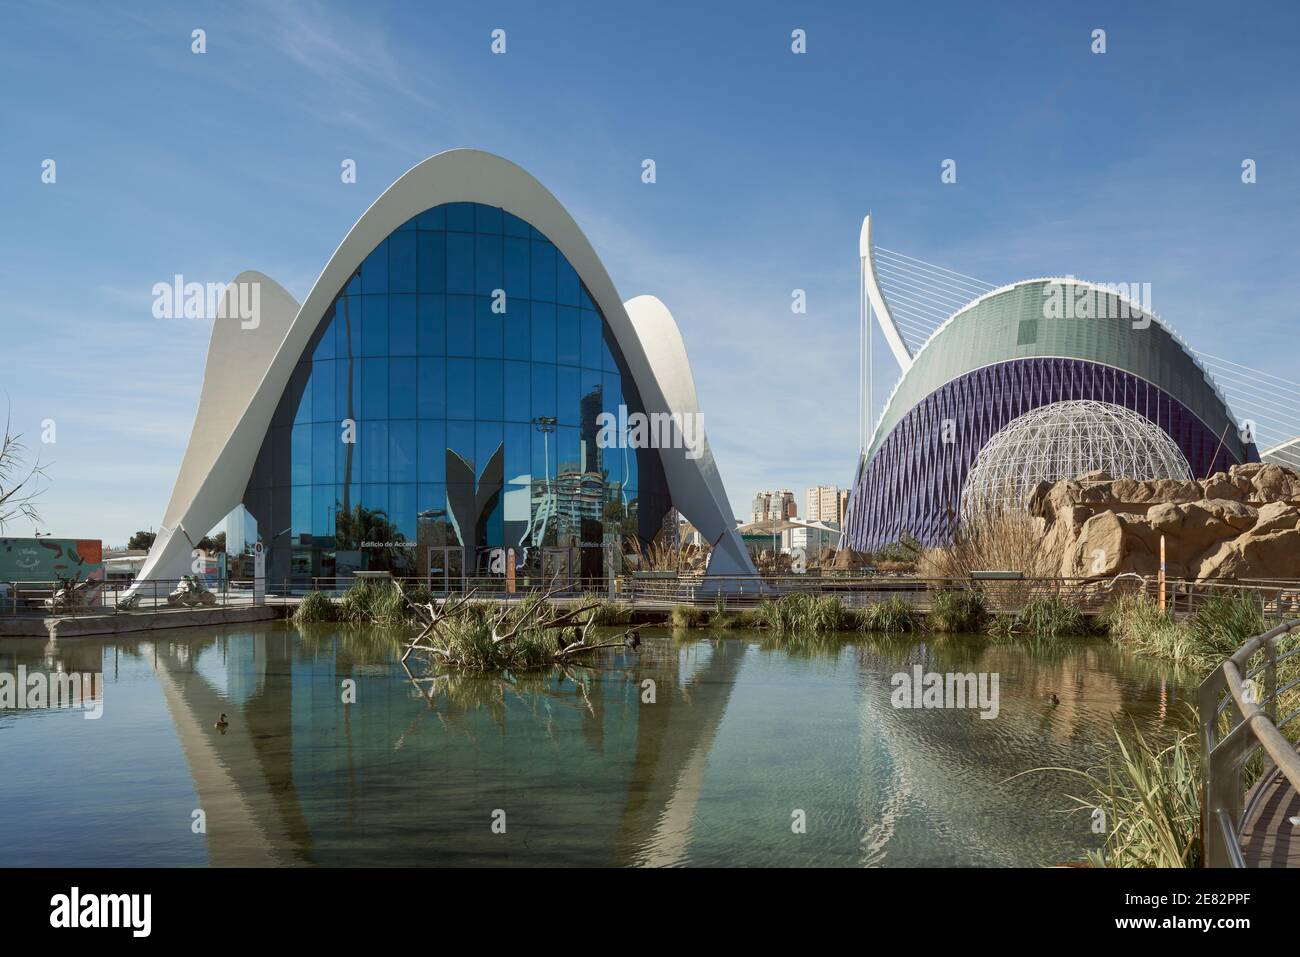 Access building to the oceanographic of the city of Valencia, Spain Stock Photo